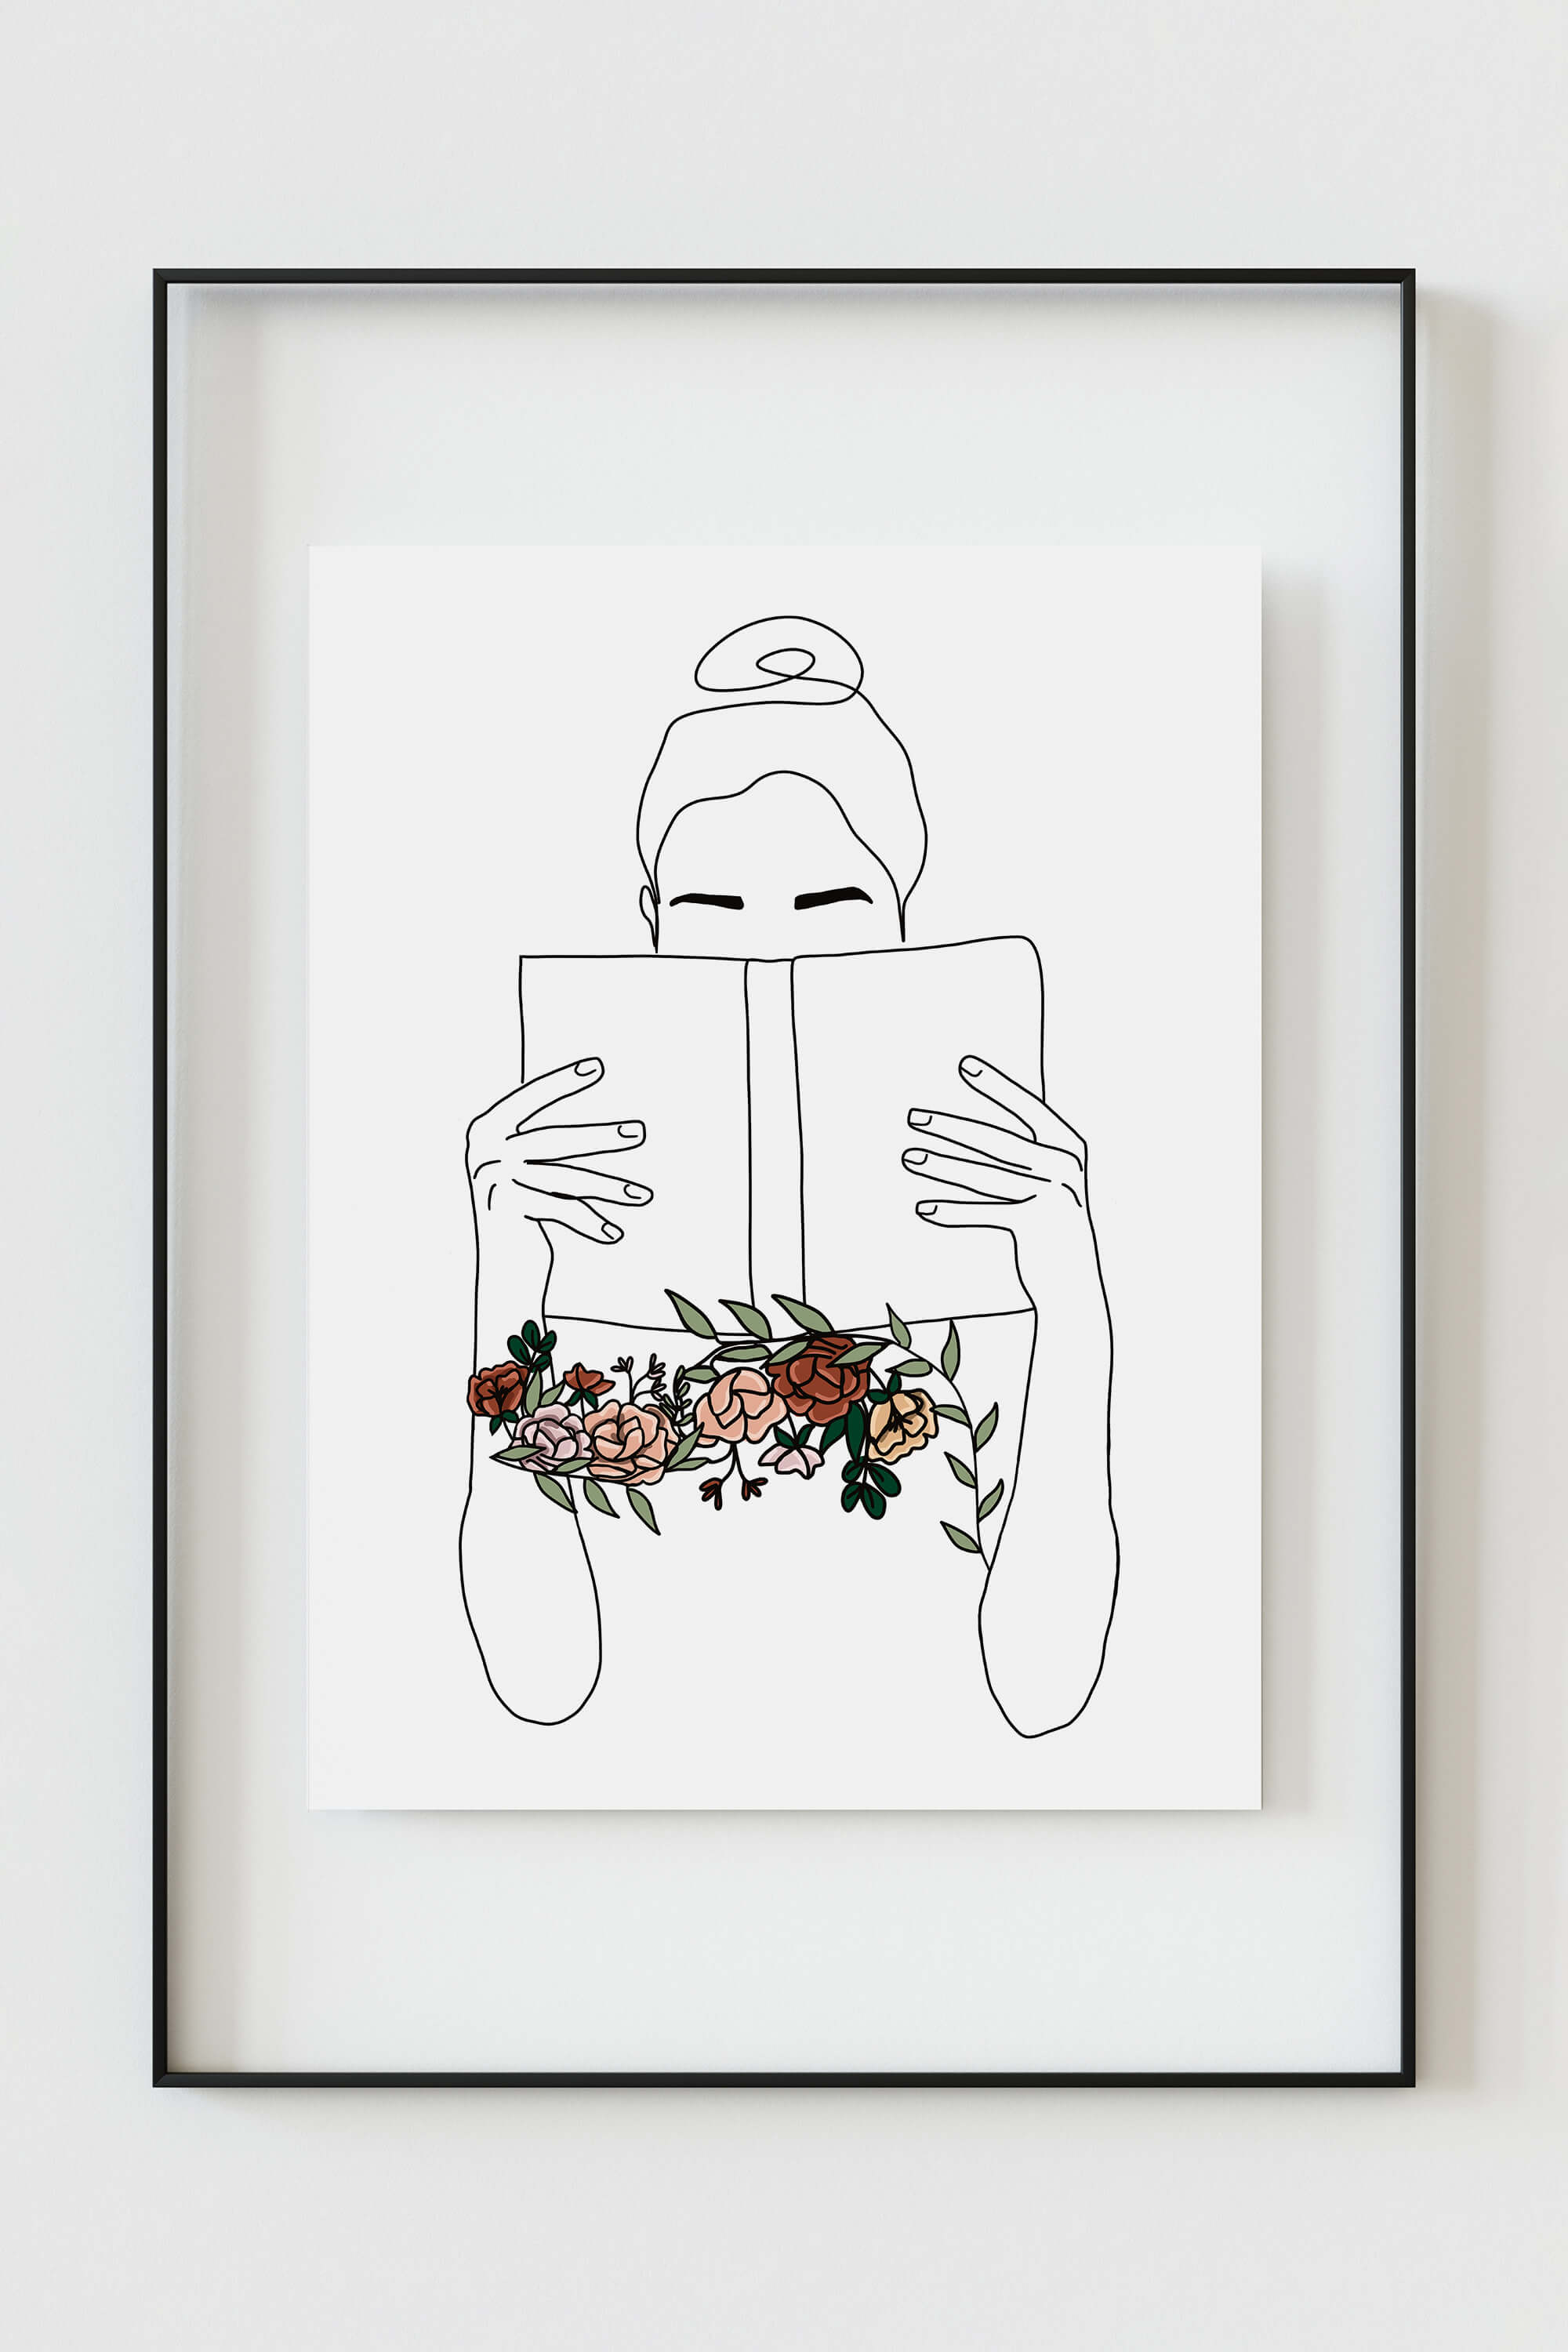 Floral Bookish Wall Decor Featuring Woman Reading a Book